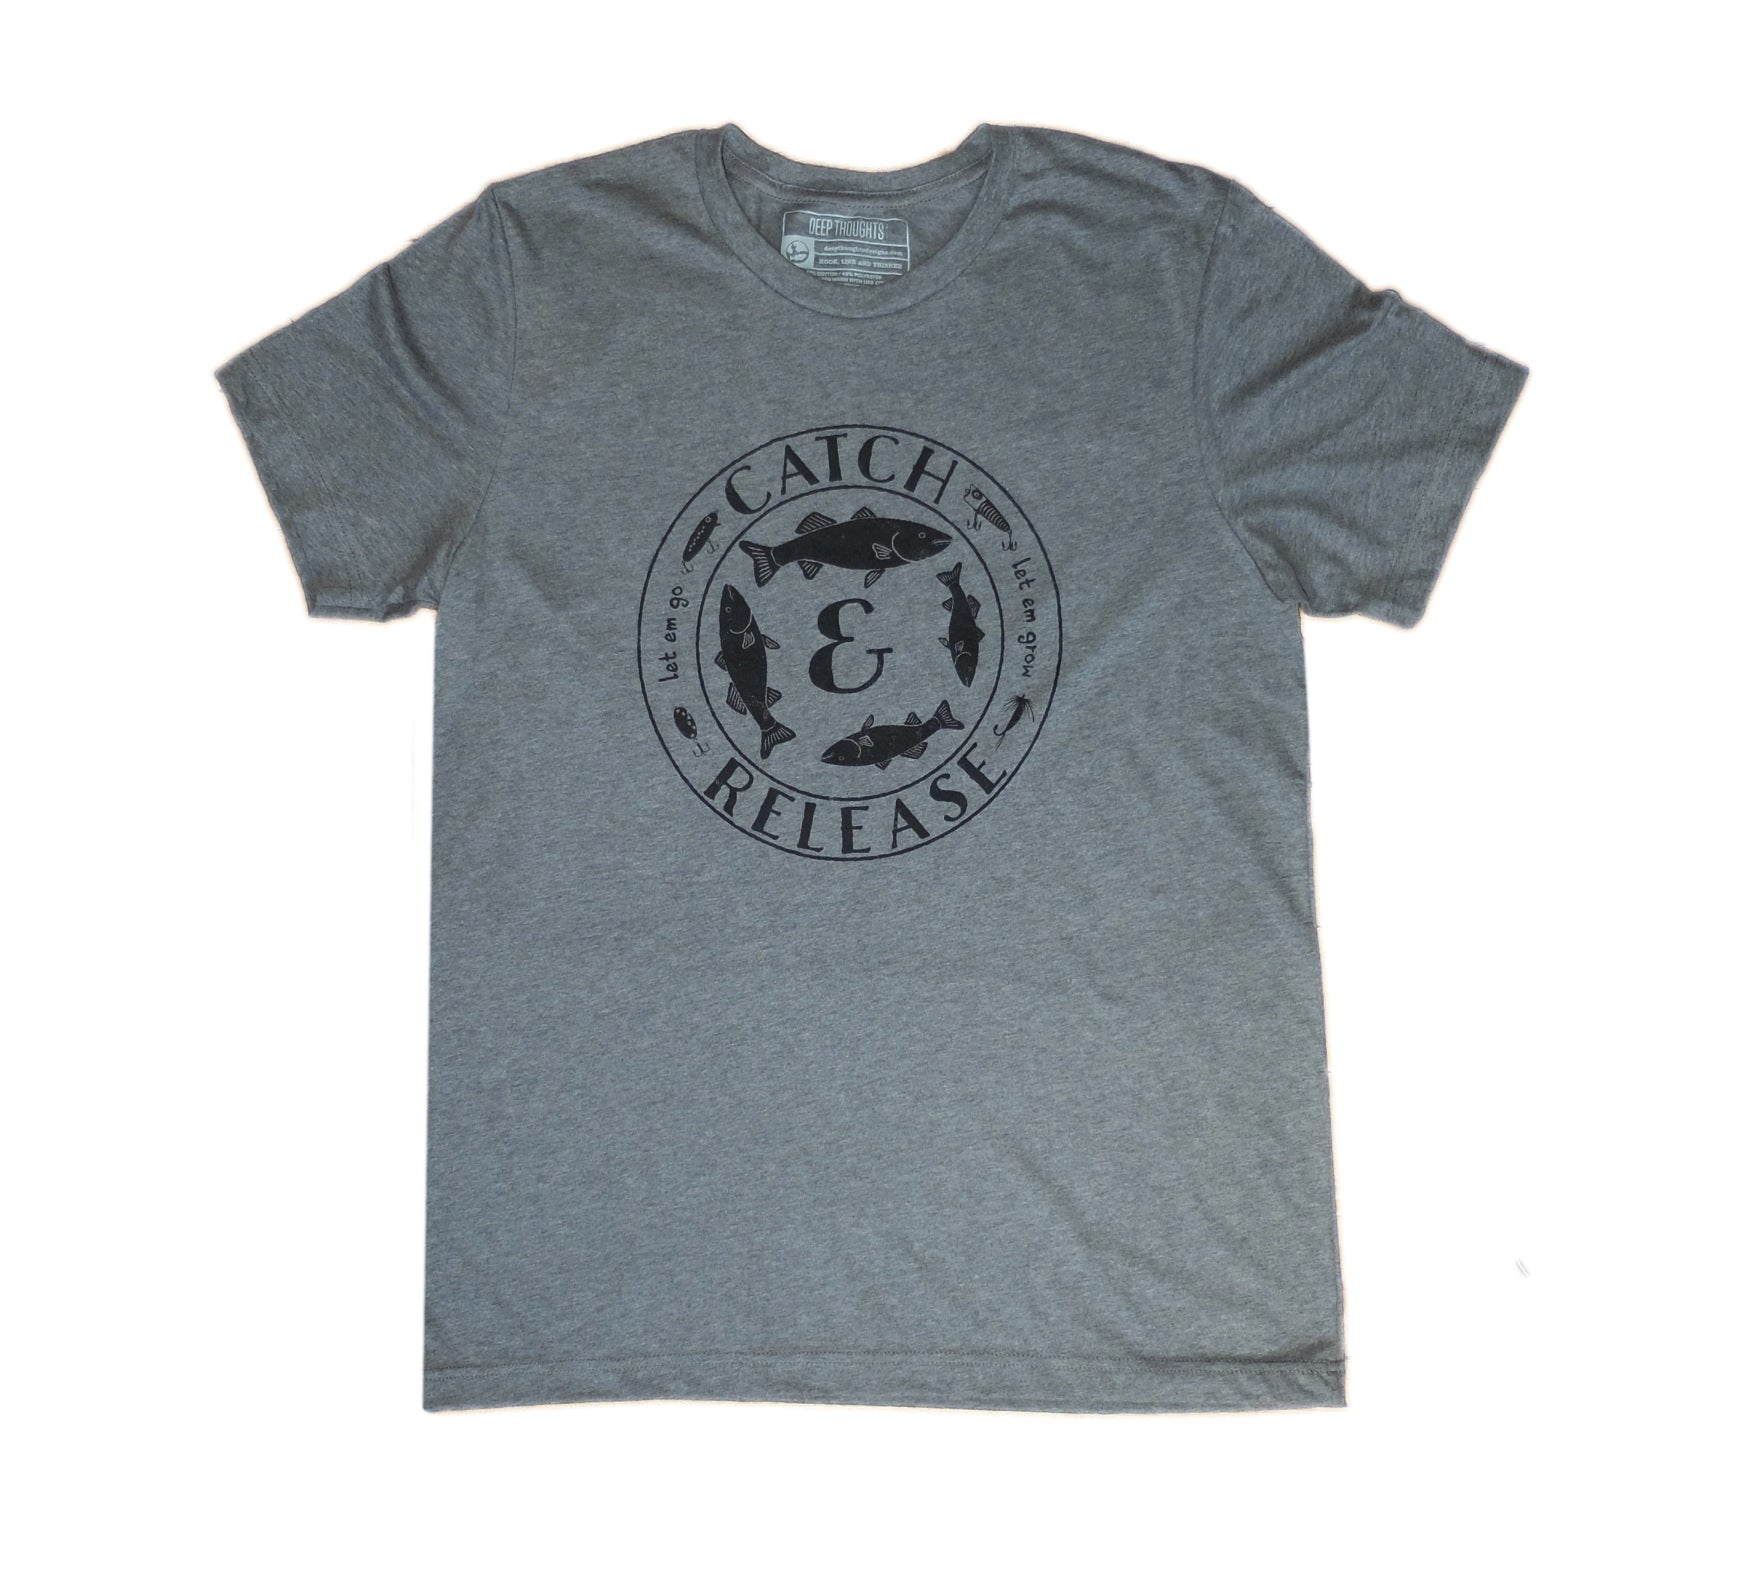 heather grey t-shirt with round vintage style 'Catch and Release' fishing graphic